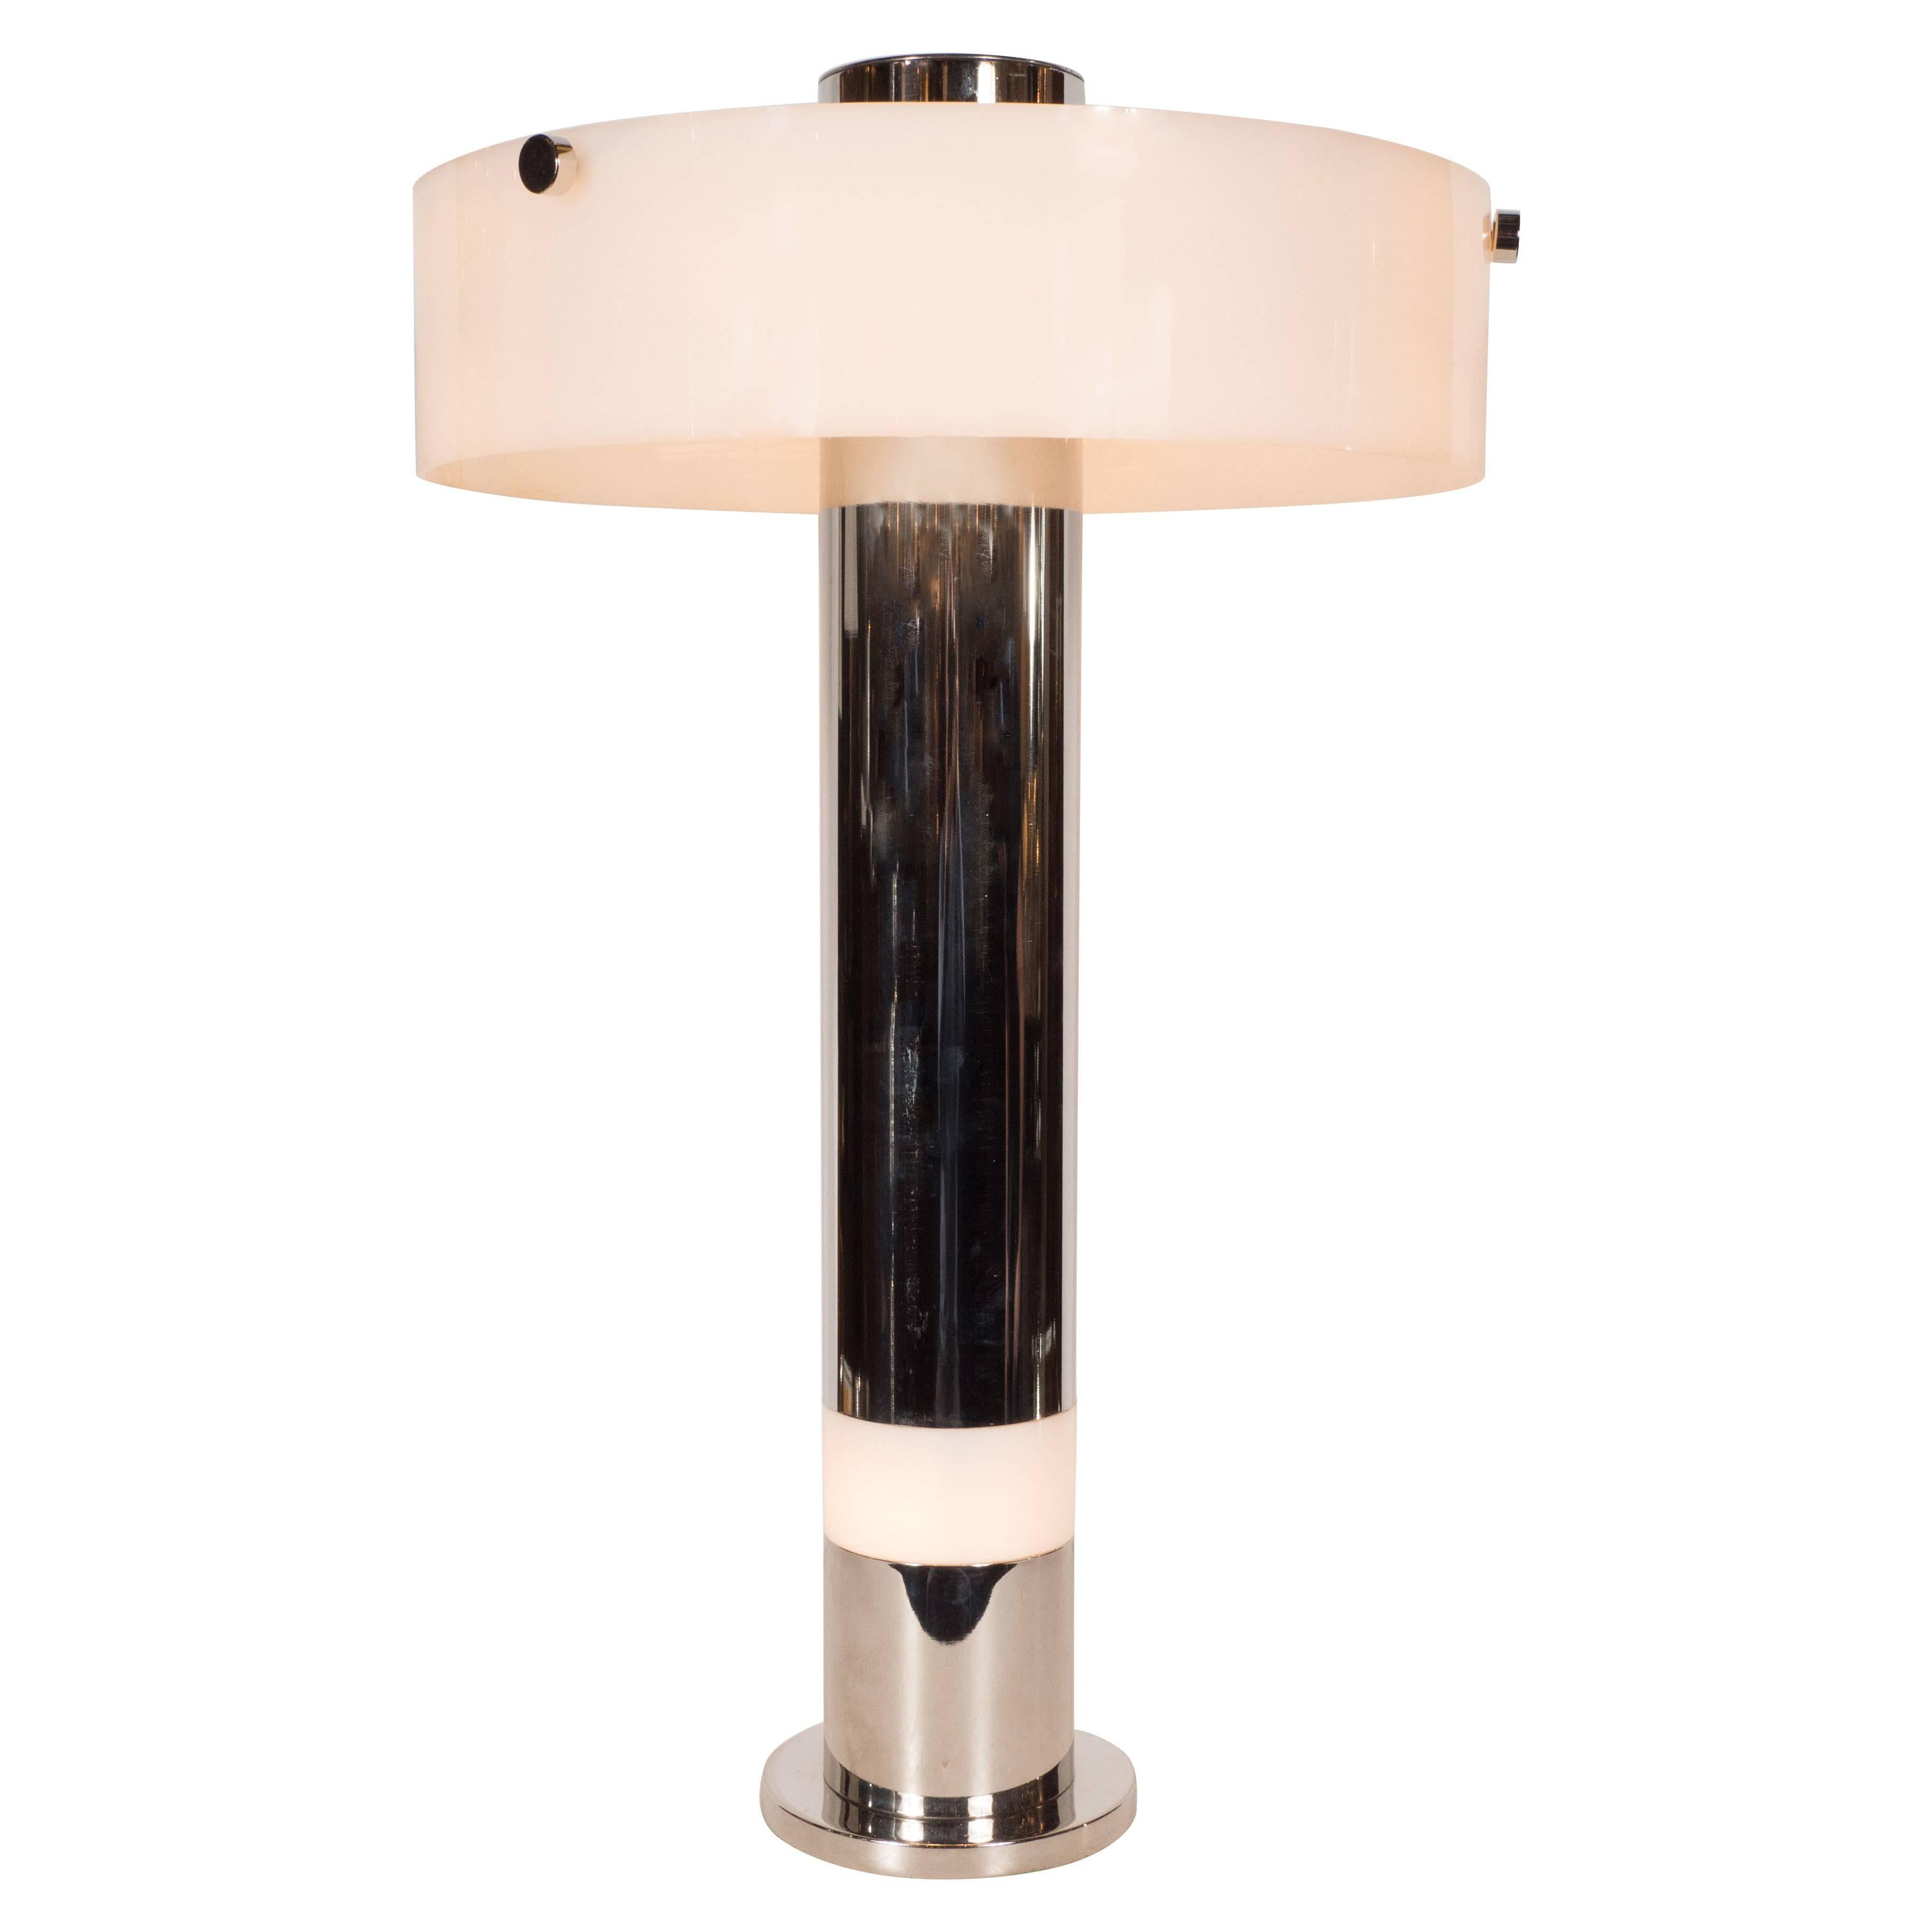 Exceptional American Curvilinear Mid-Century Modern Lucite & Chrome Table Lamp